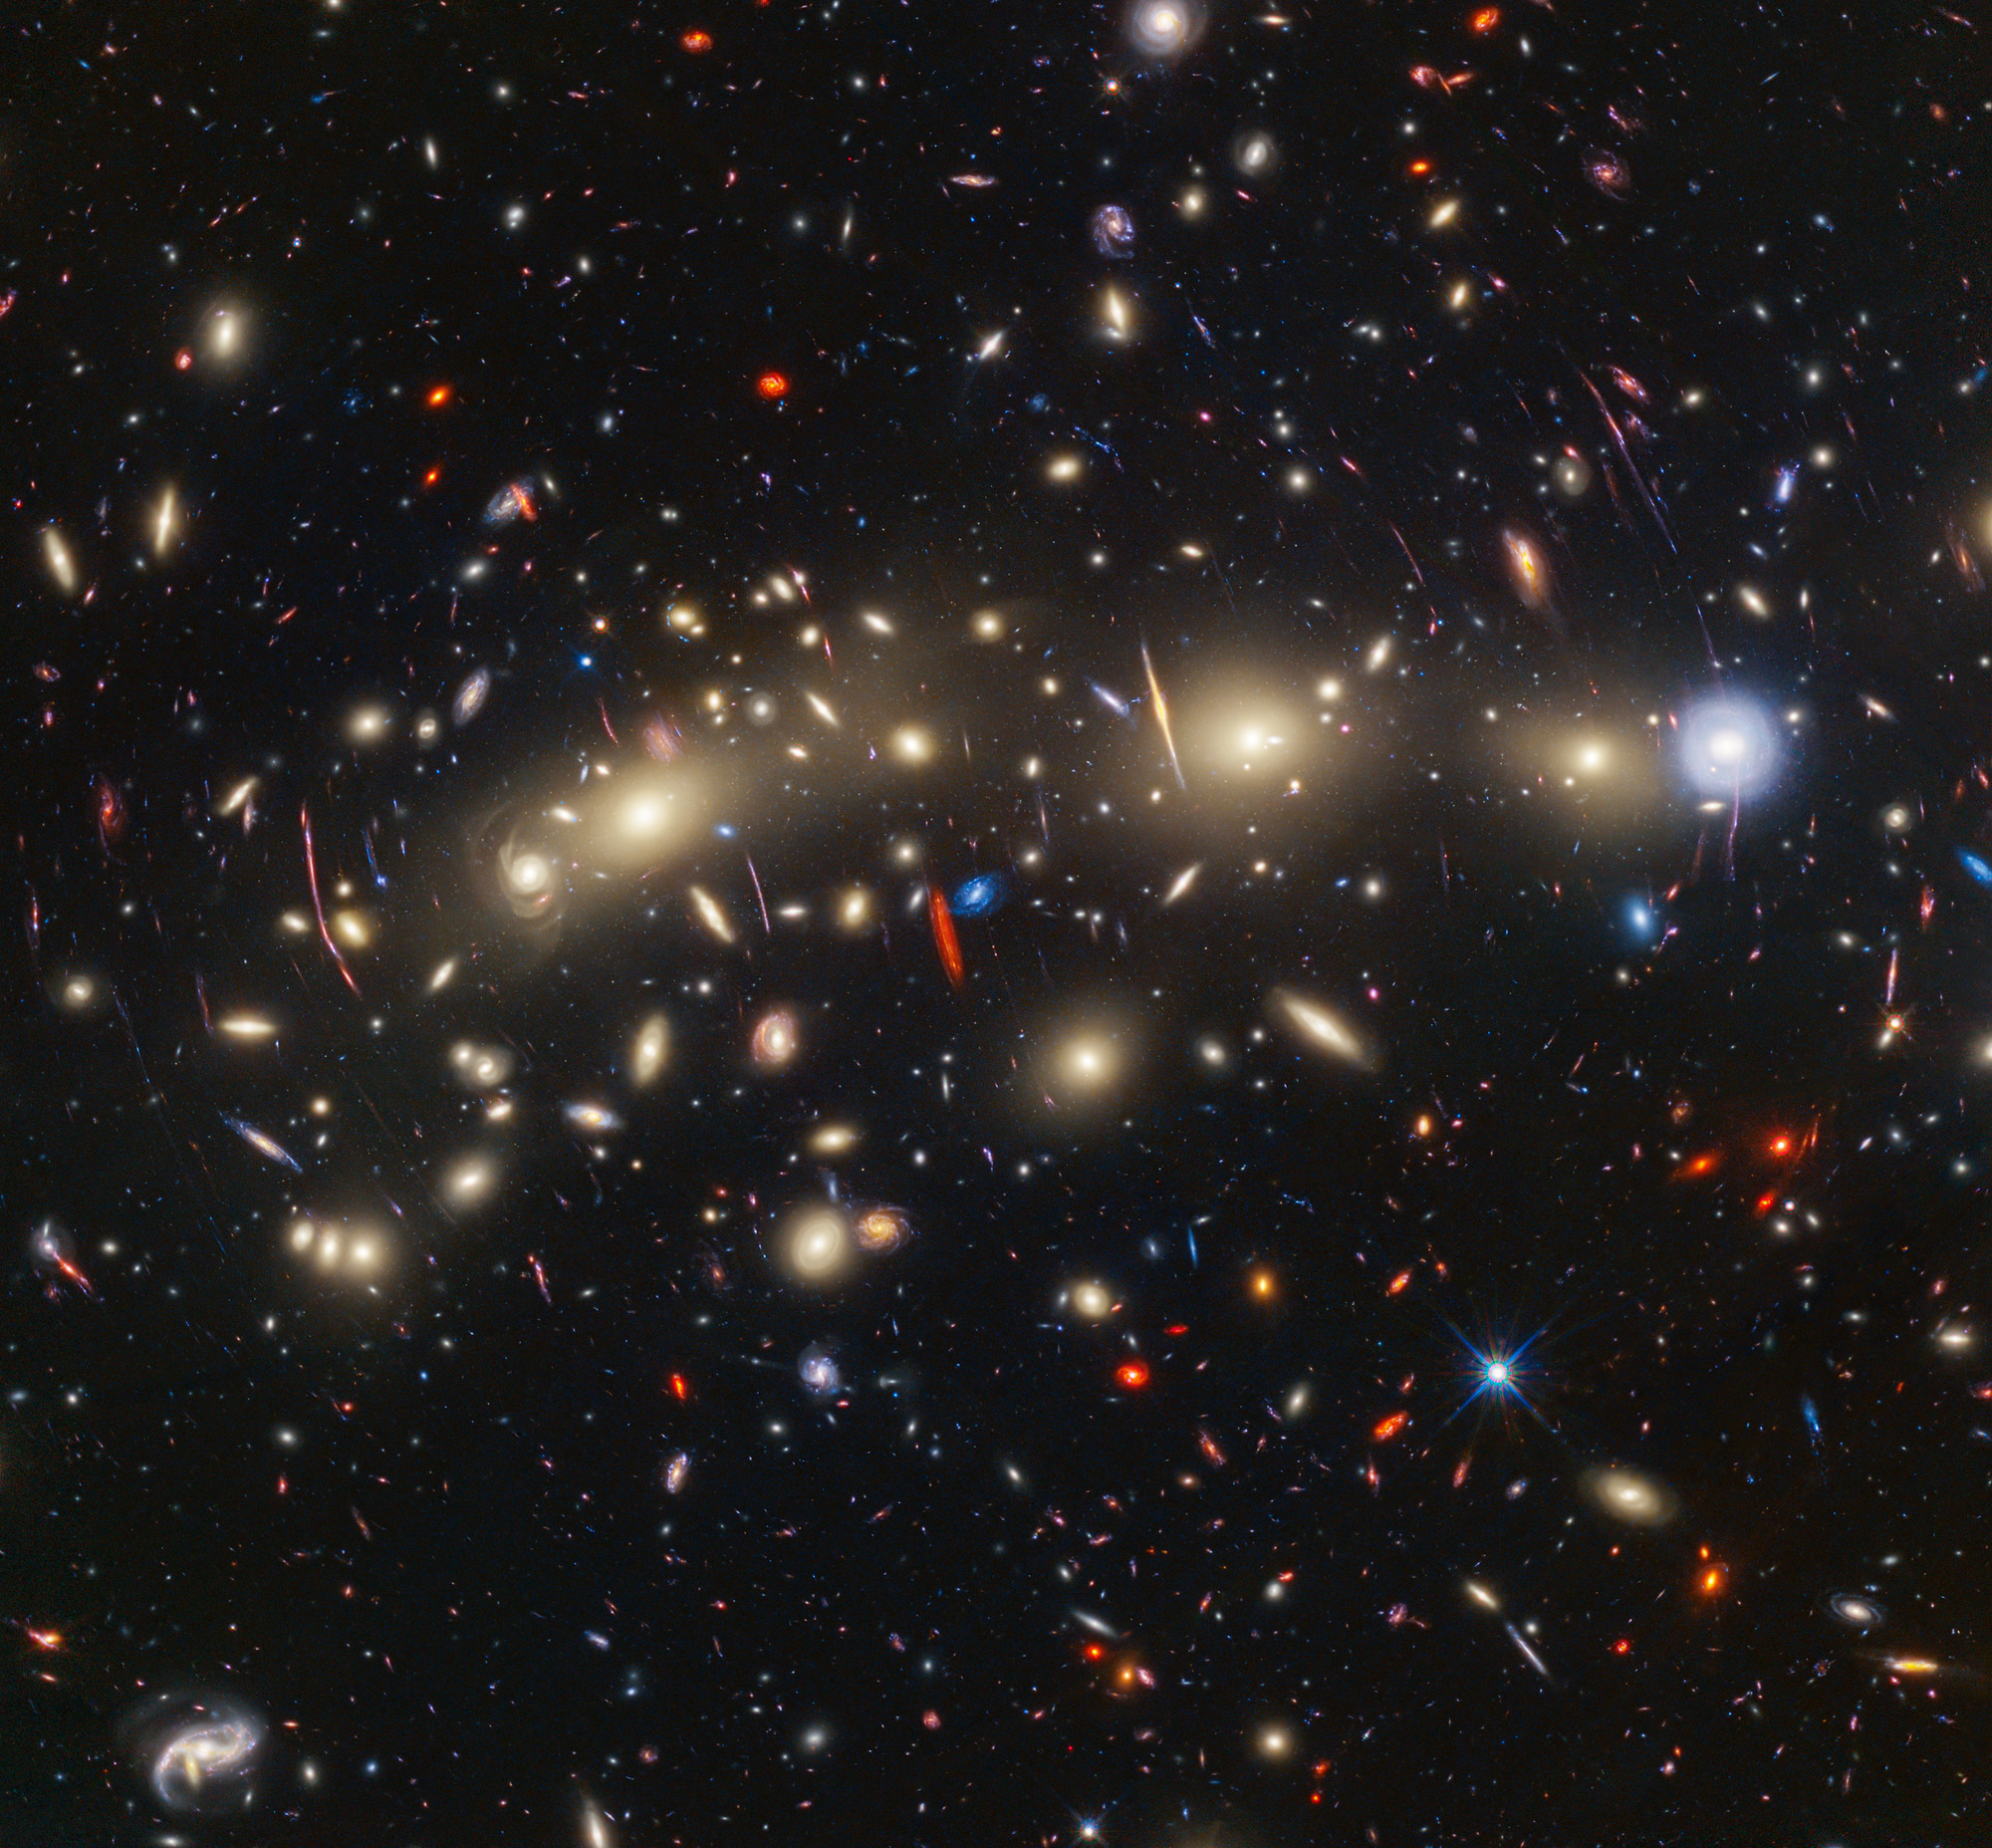 The most colorful group of galaxies in the joint image by James Webb and Hubble